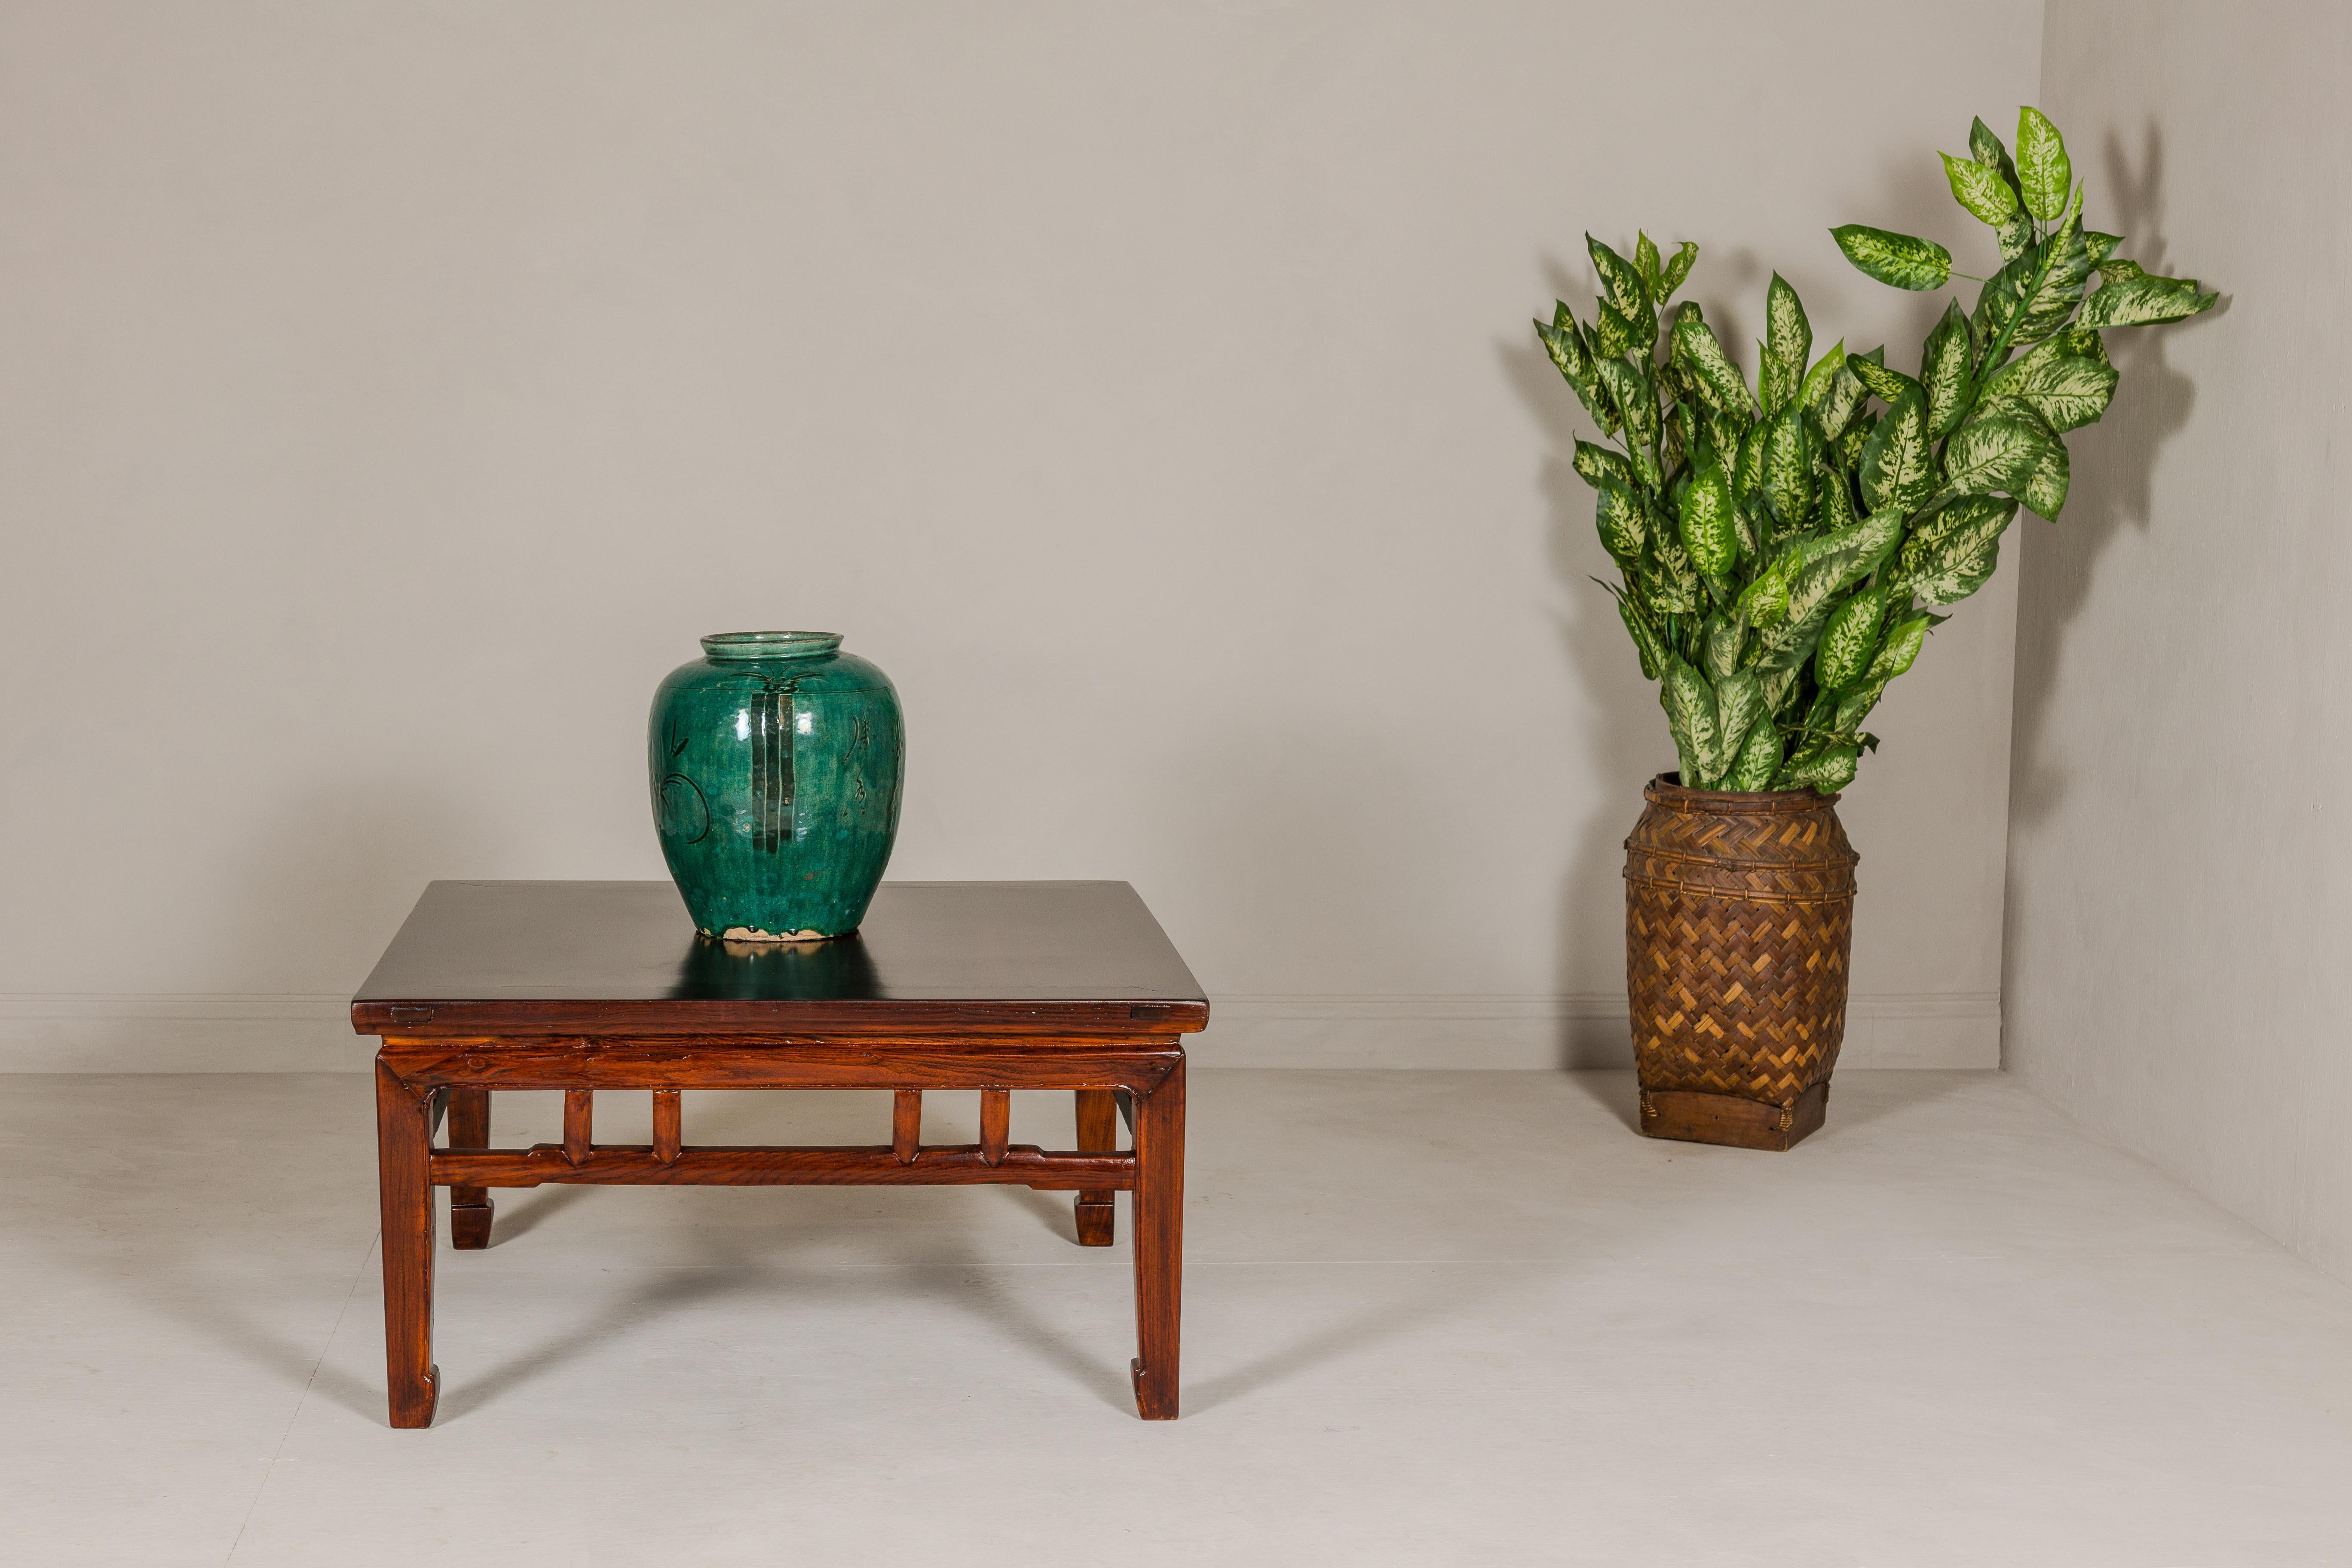 A vintage Chinese low square coffee table from the mid 20th century with brown lacquer, horse hoof legs and humpback stretchers. This vintage Chinese low square coffee table, originating from the mid-20th century, is a splendid example of